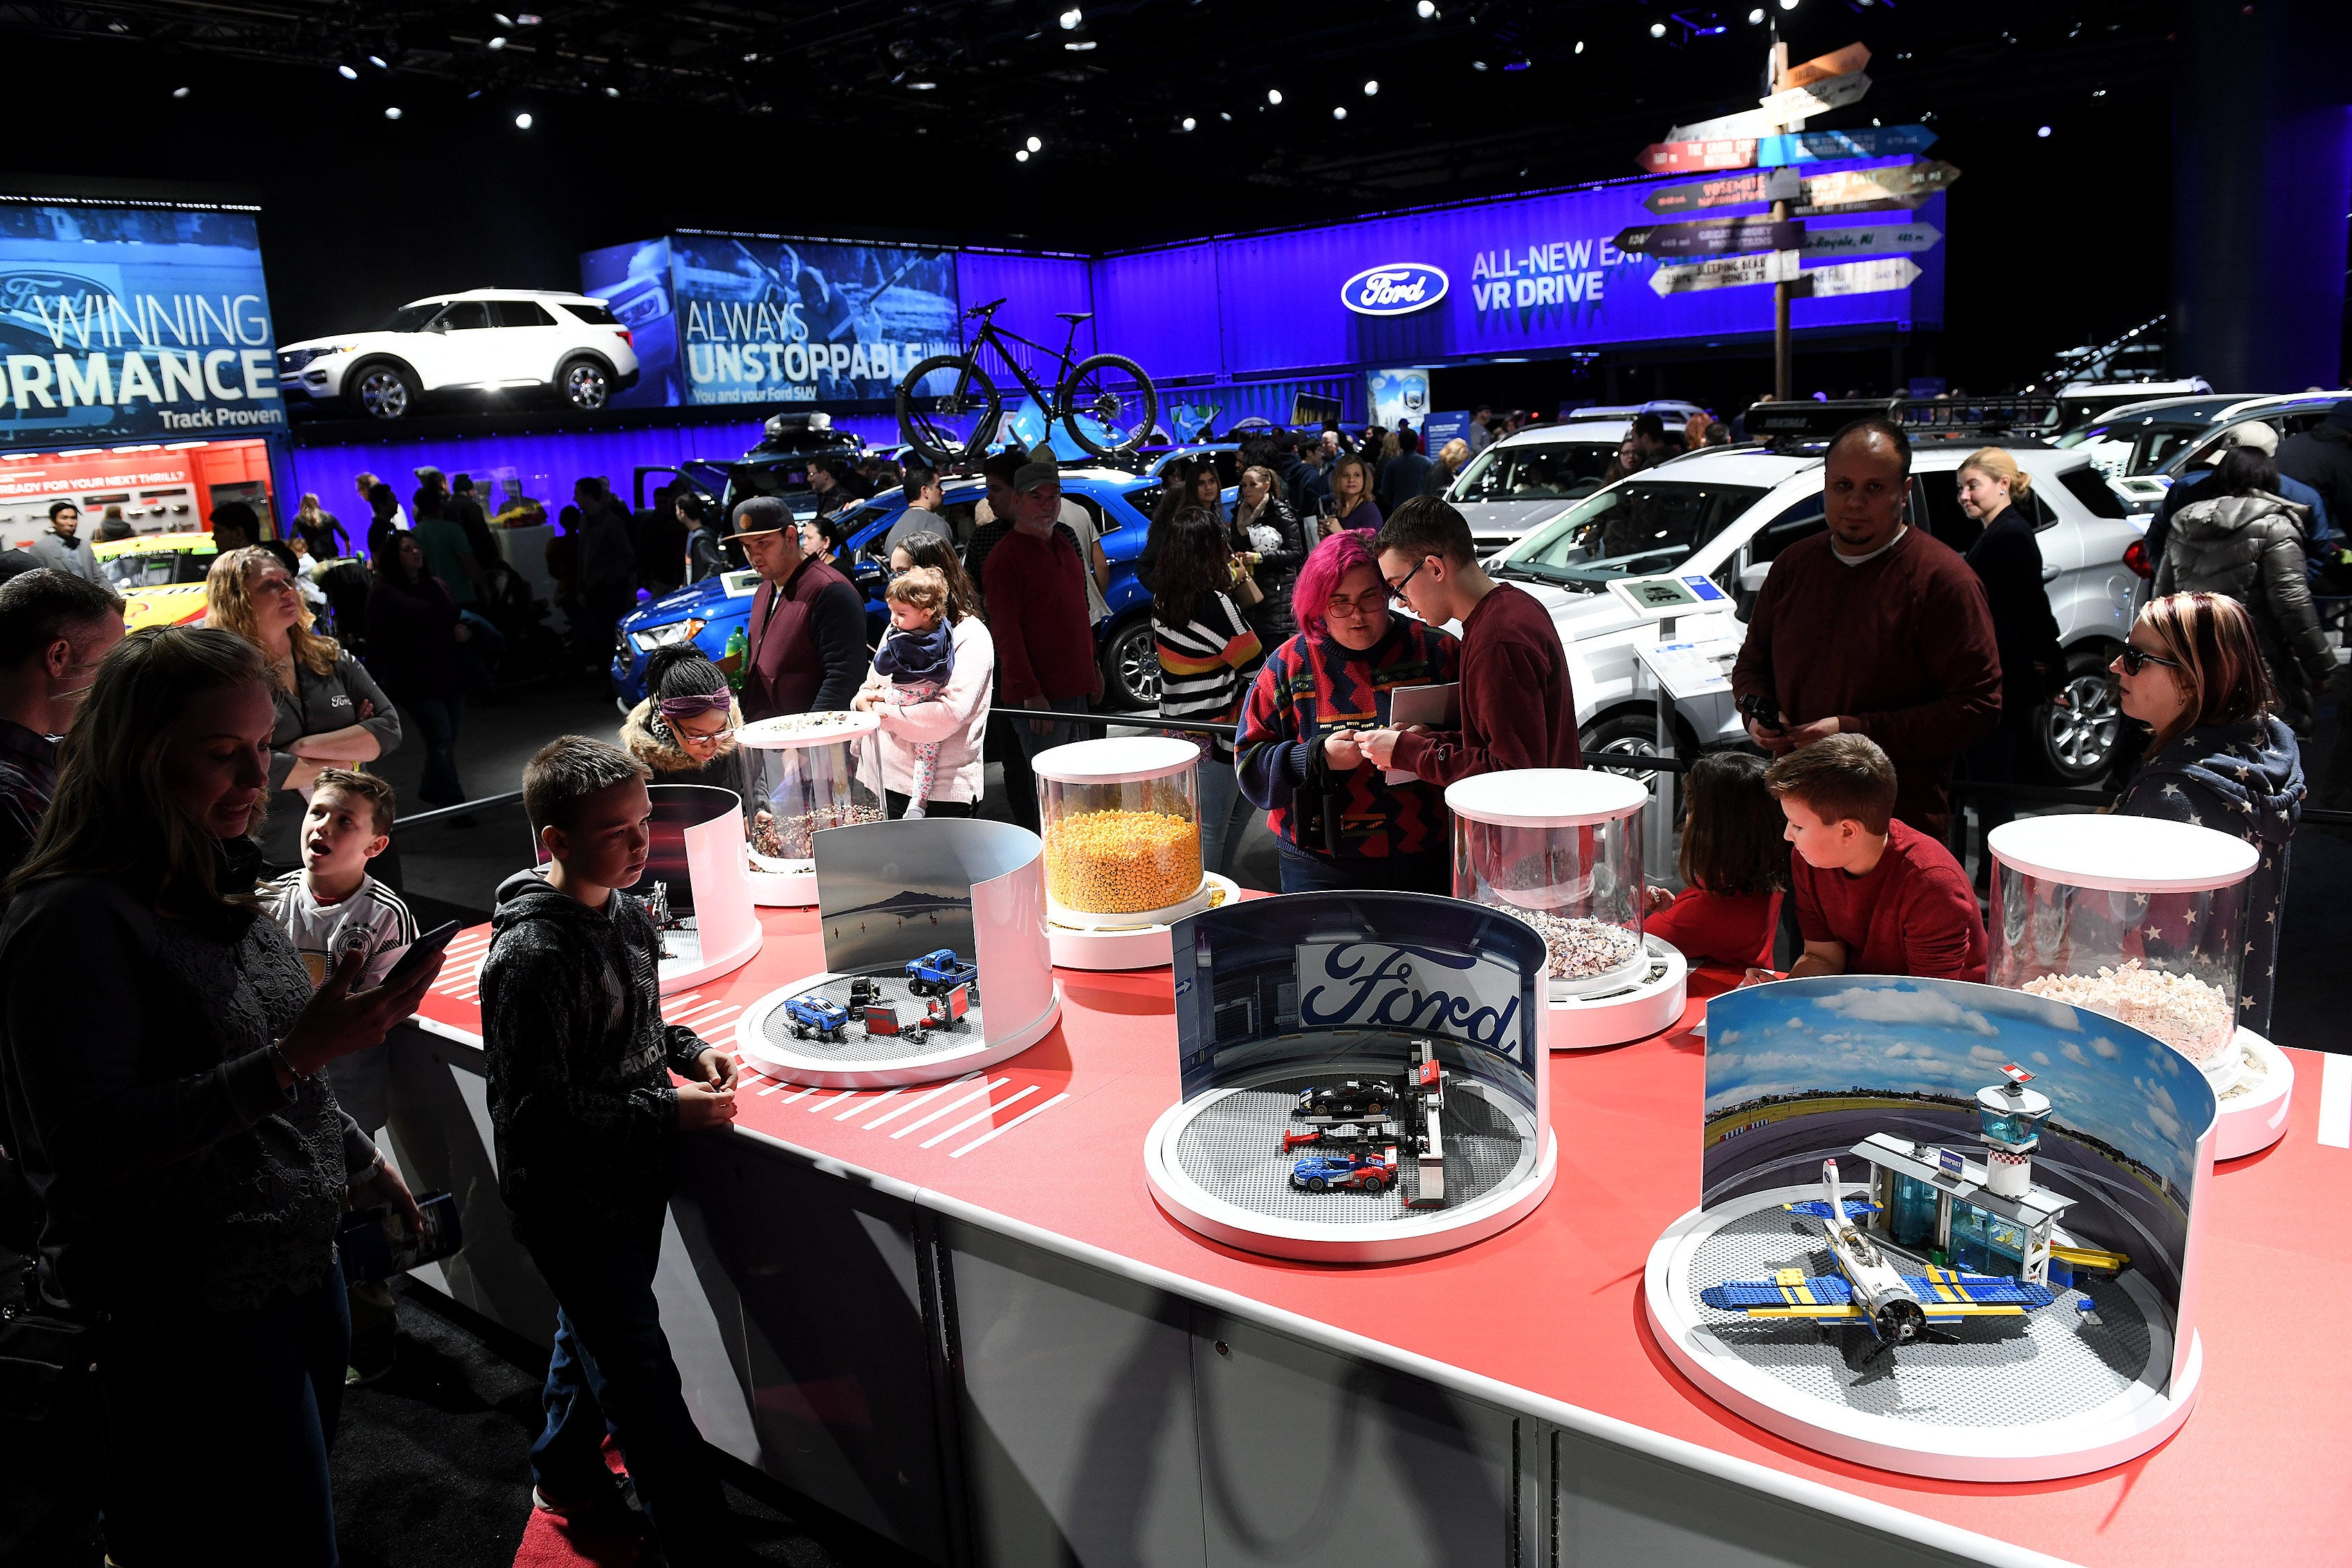 People can build Lego figures at the Ford display at the North American International Auto Show at Cobo Center in Detroit on Jan. 20, 2019.